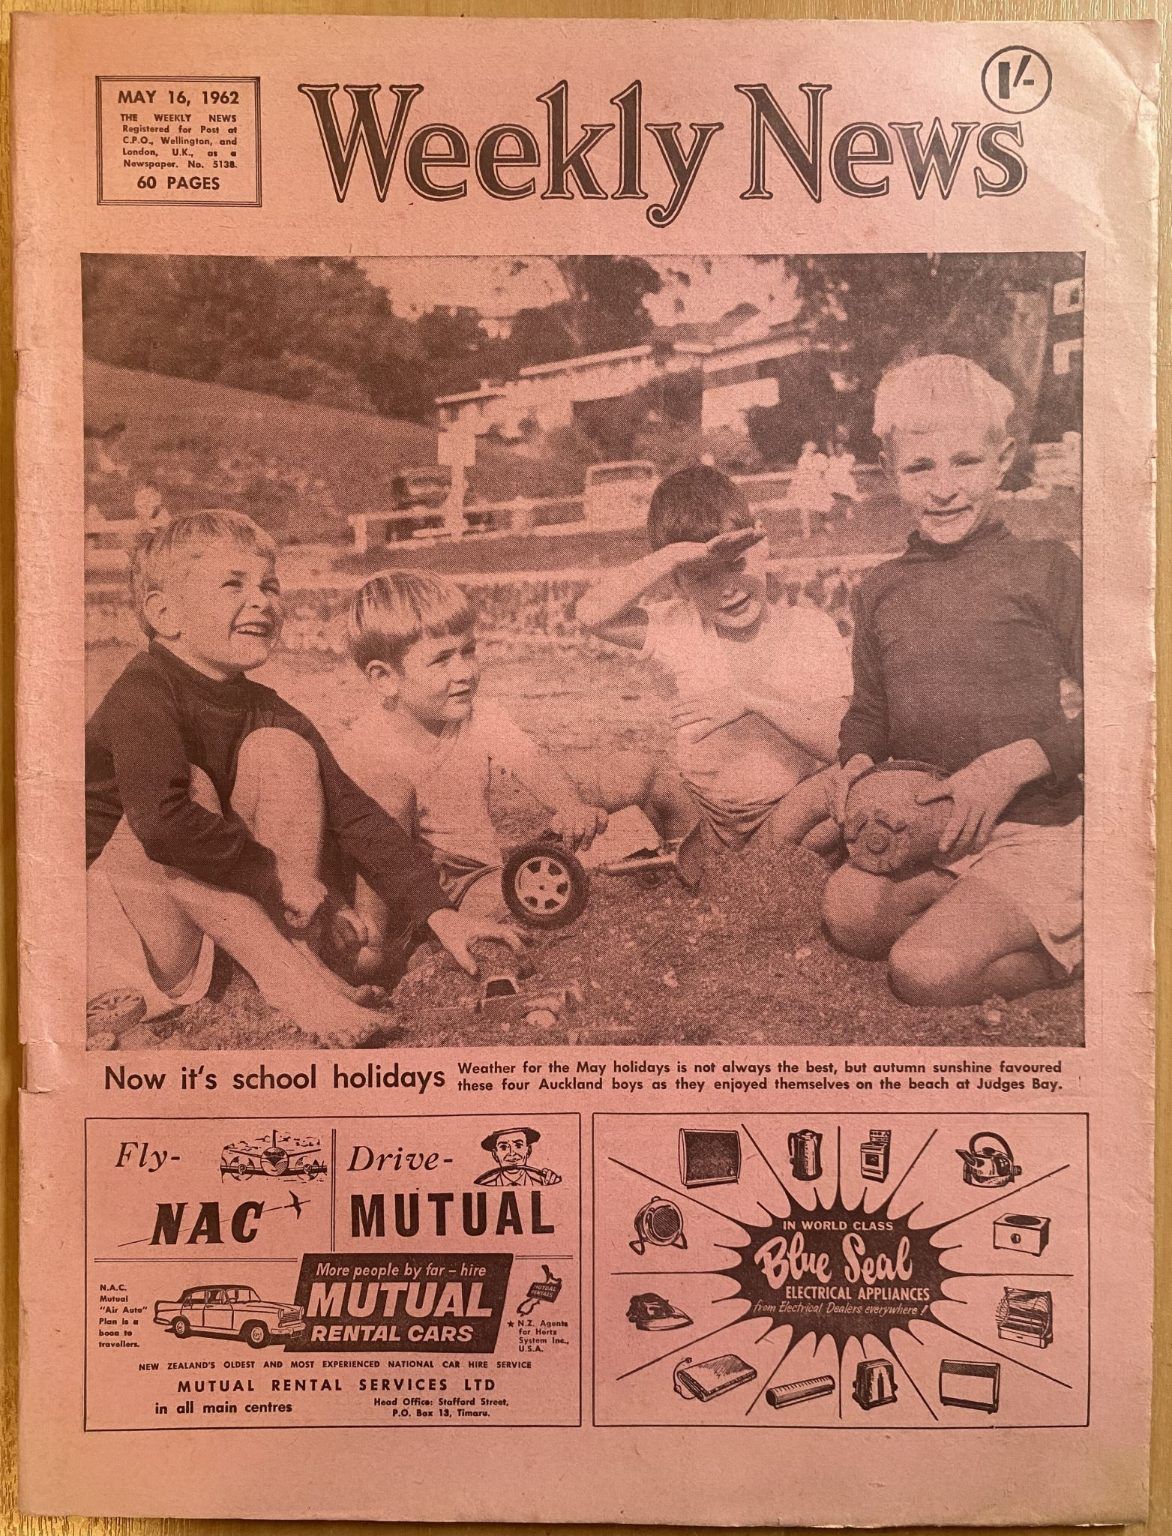 OLD NEWSPAPER: The Weekly News, No. 5138, 16 May 1962